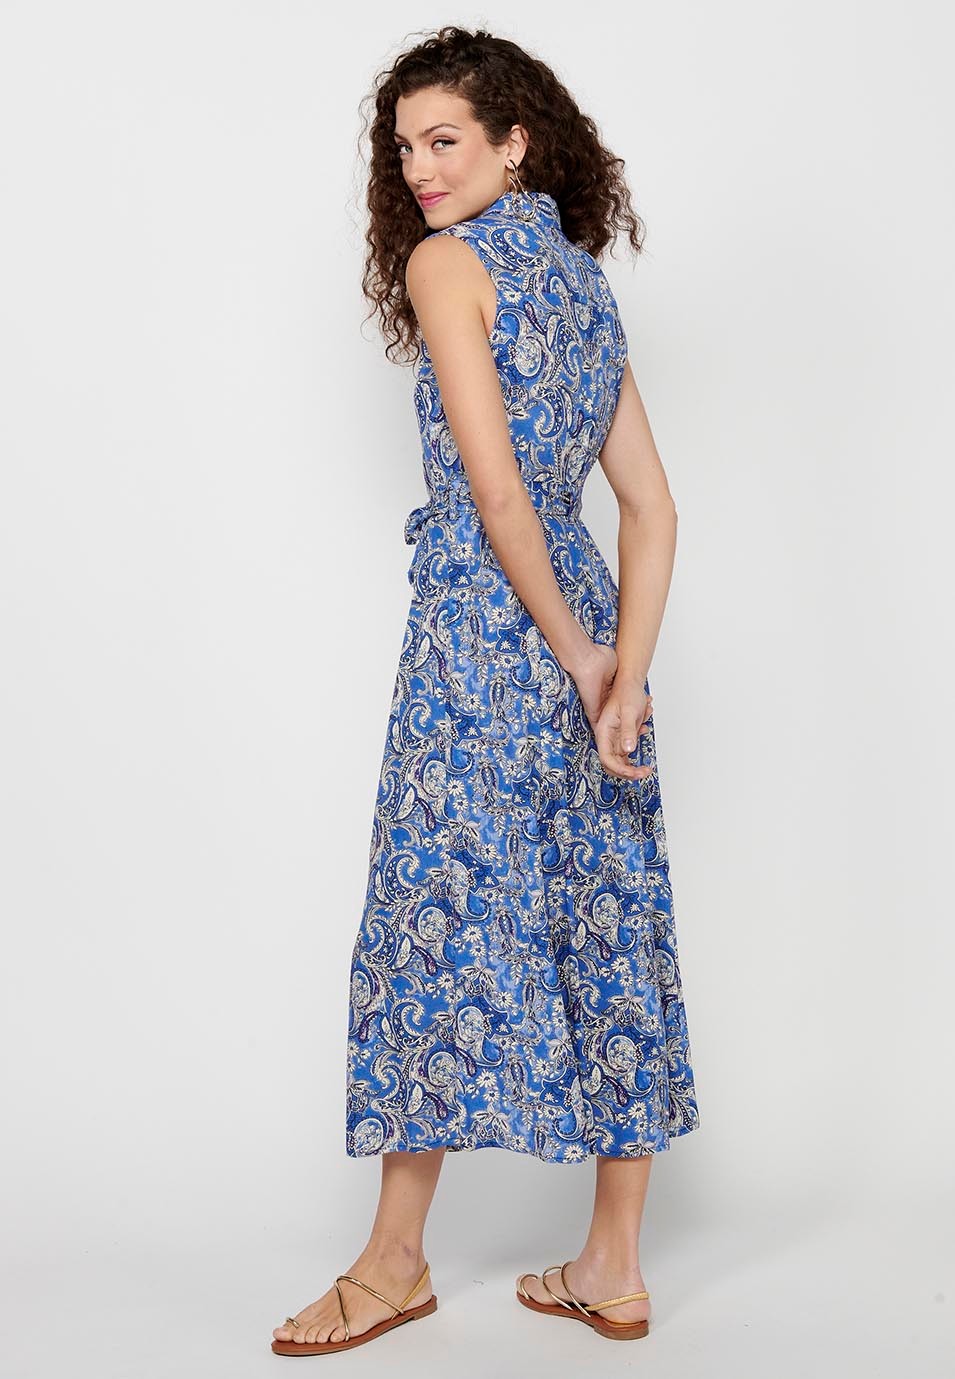 Long short-sleeved dress with floral print and front closure with buttons from the waist in Blue for Women 5